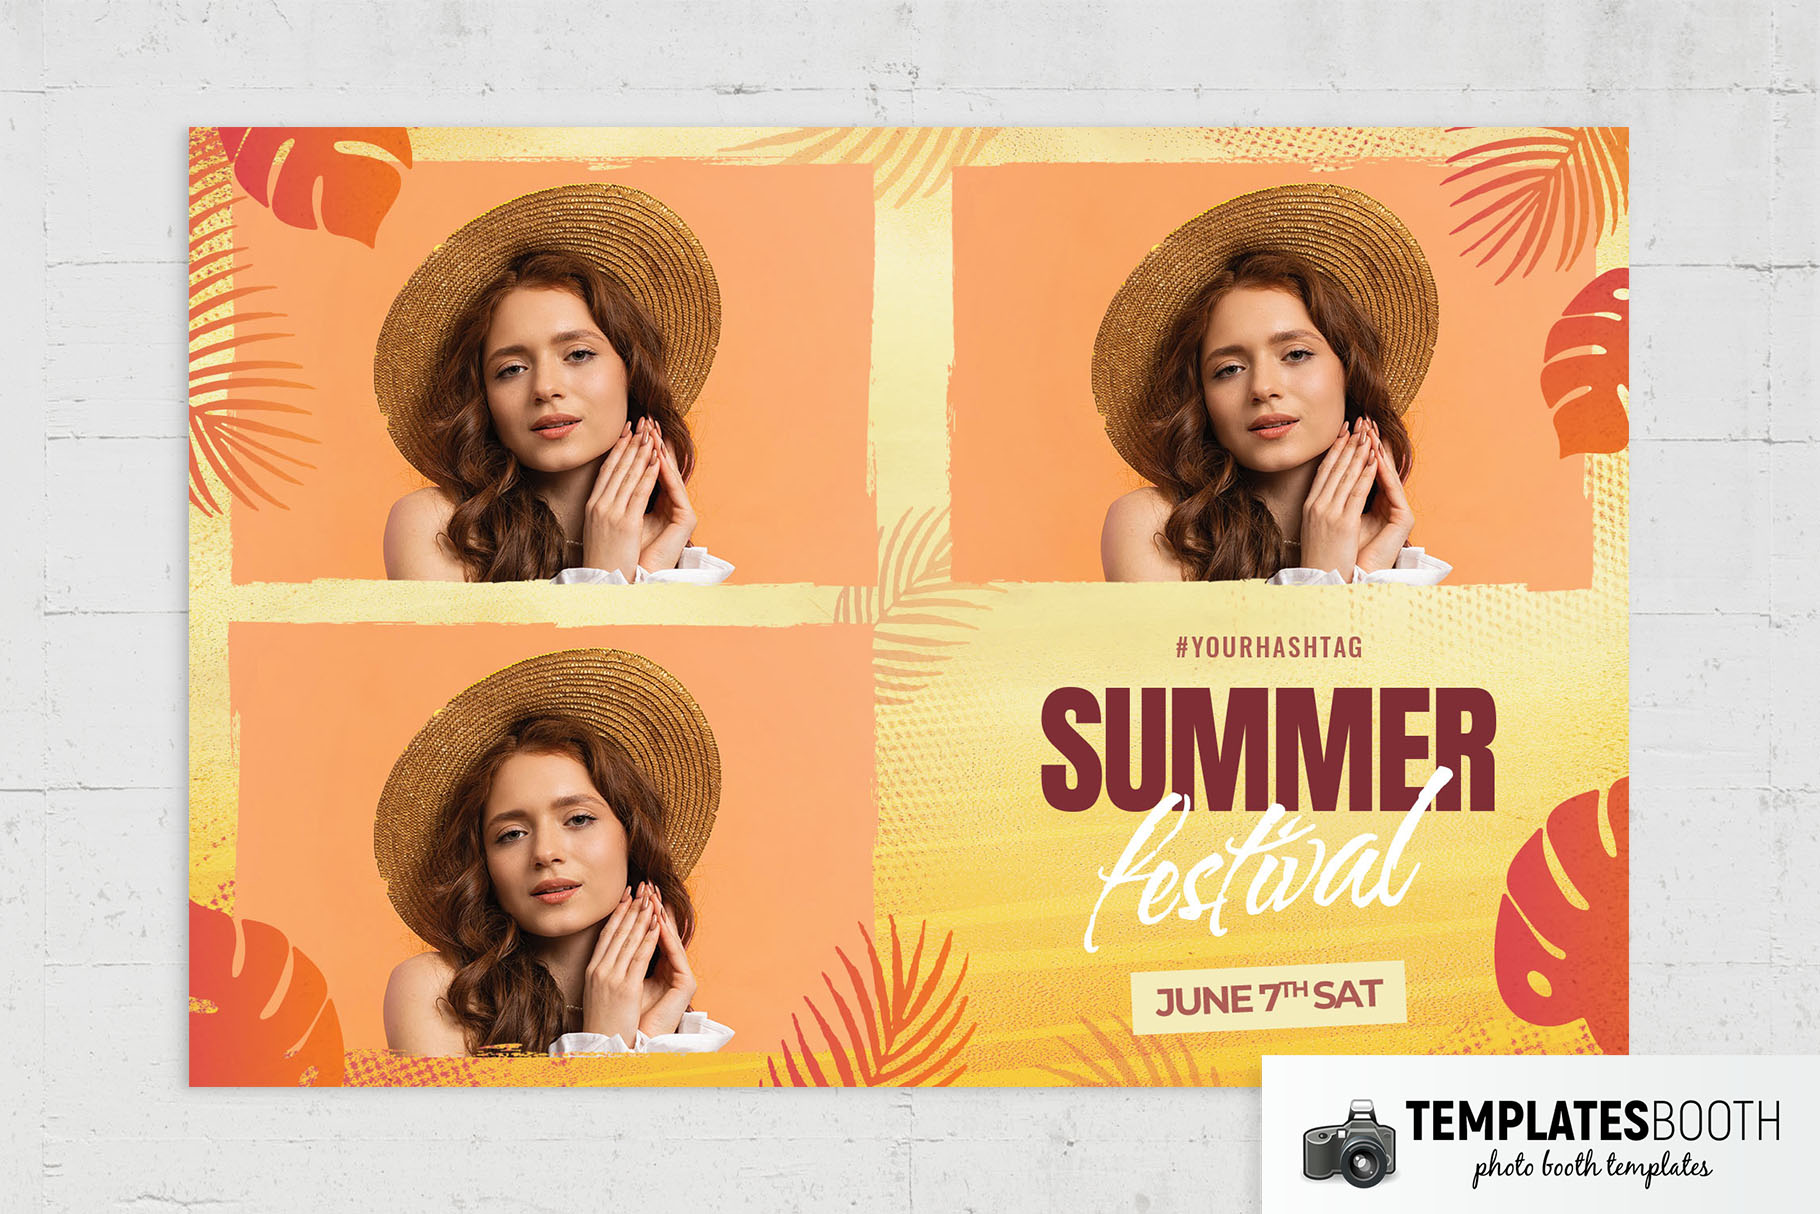 Summer Festival Photo Booth Template